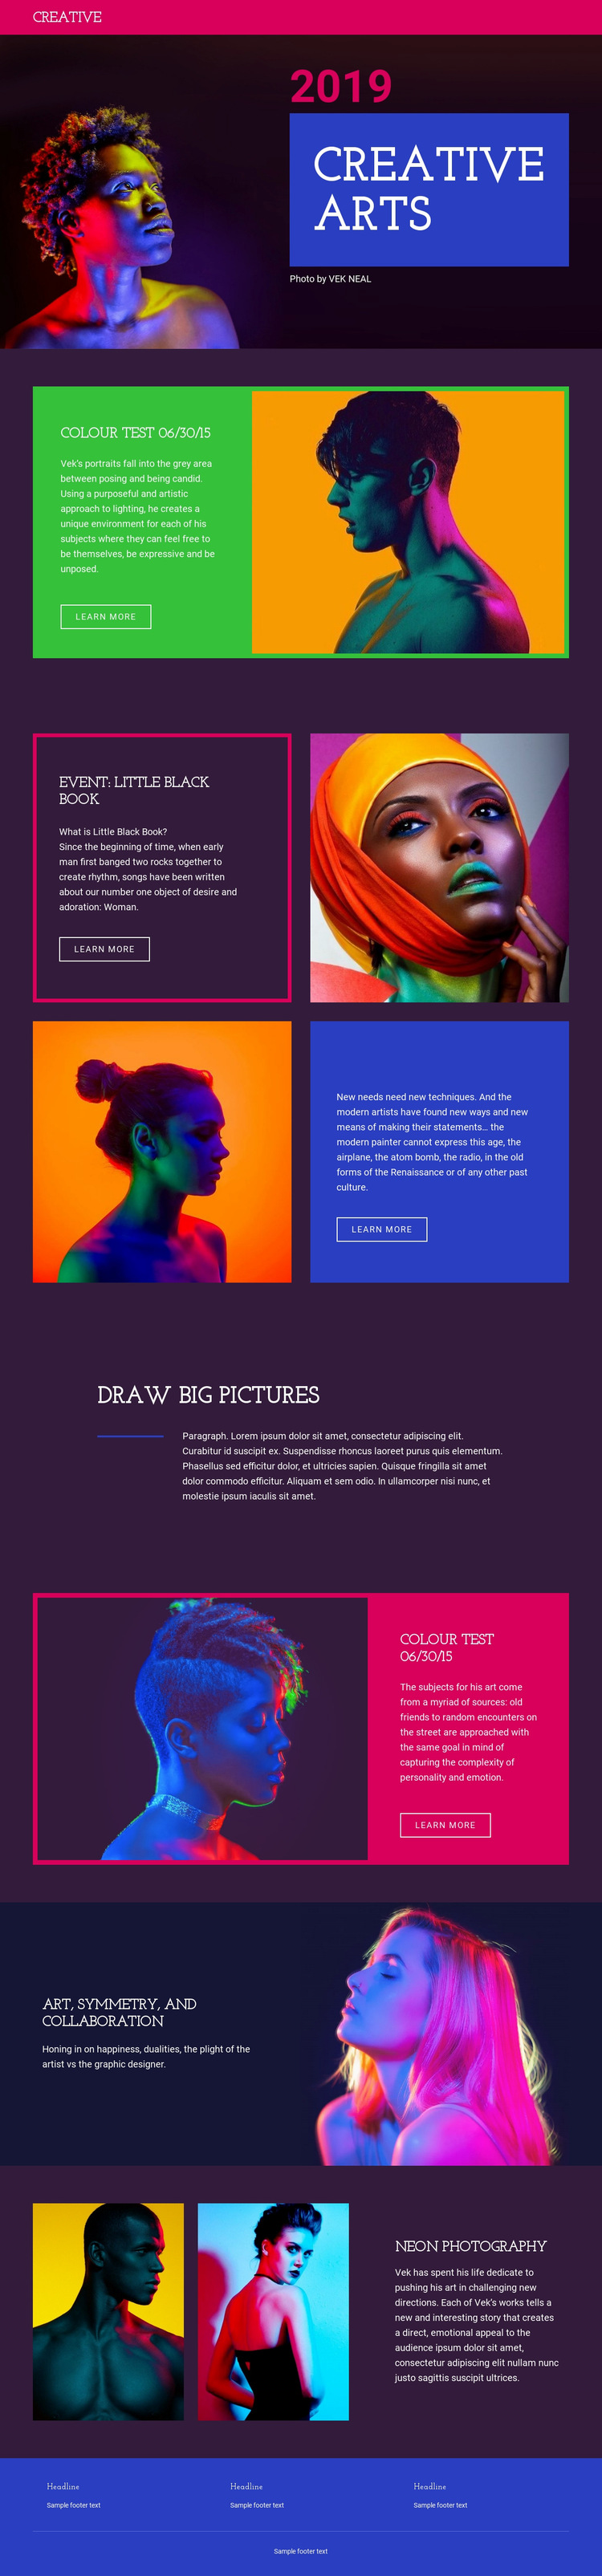 Limited-edition photography Web Page Design